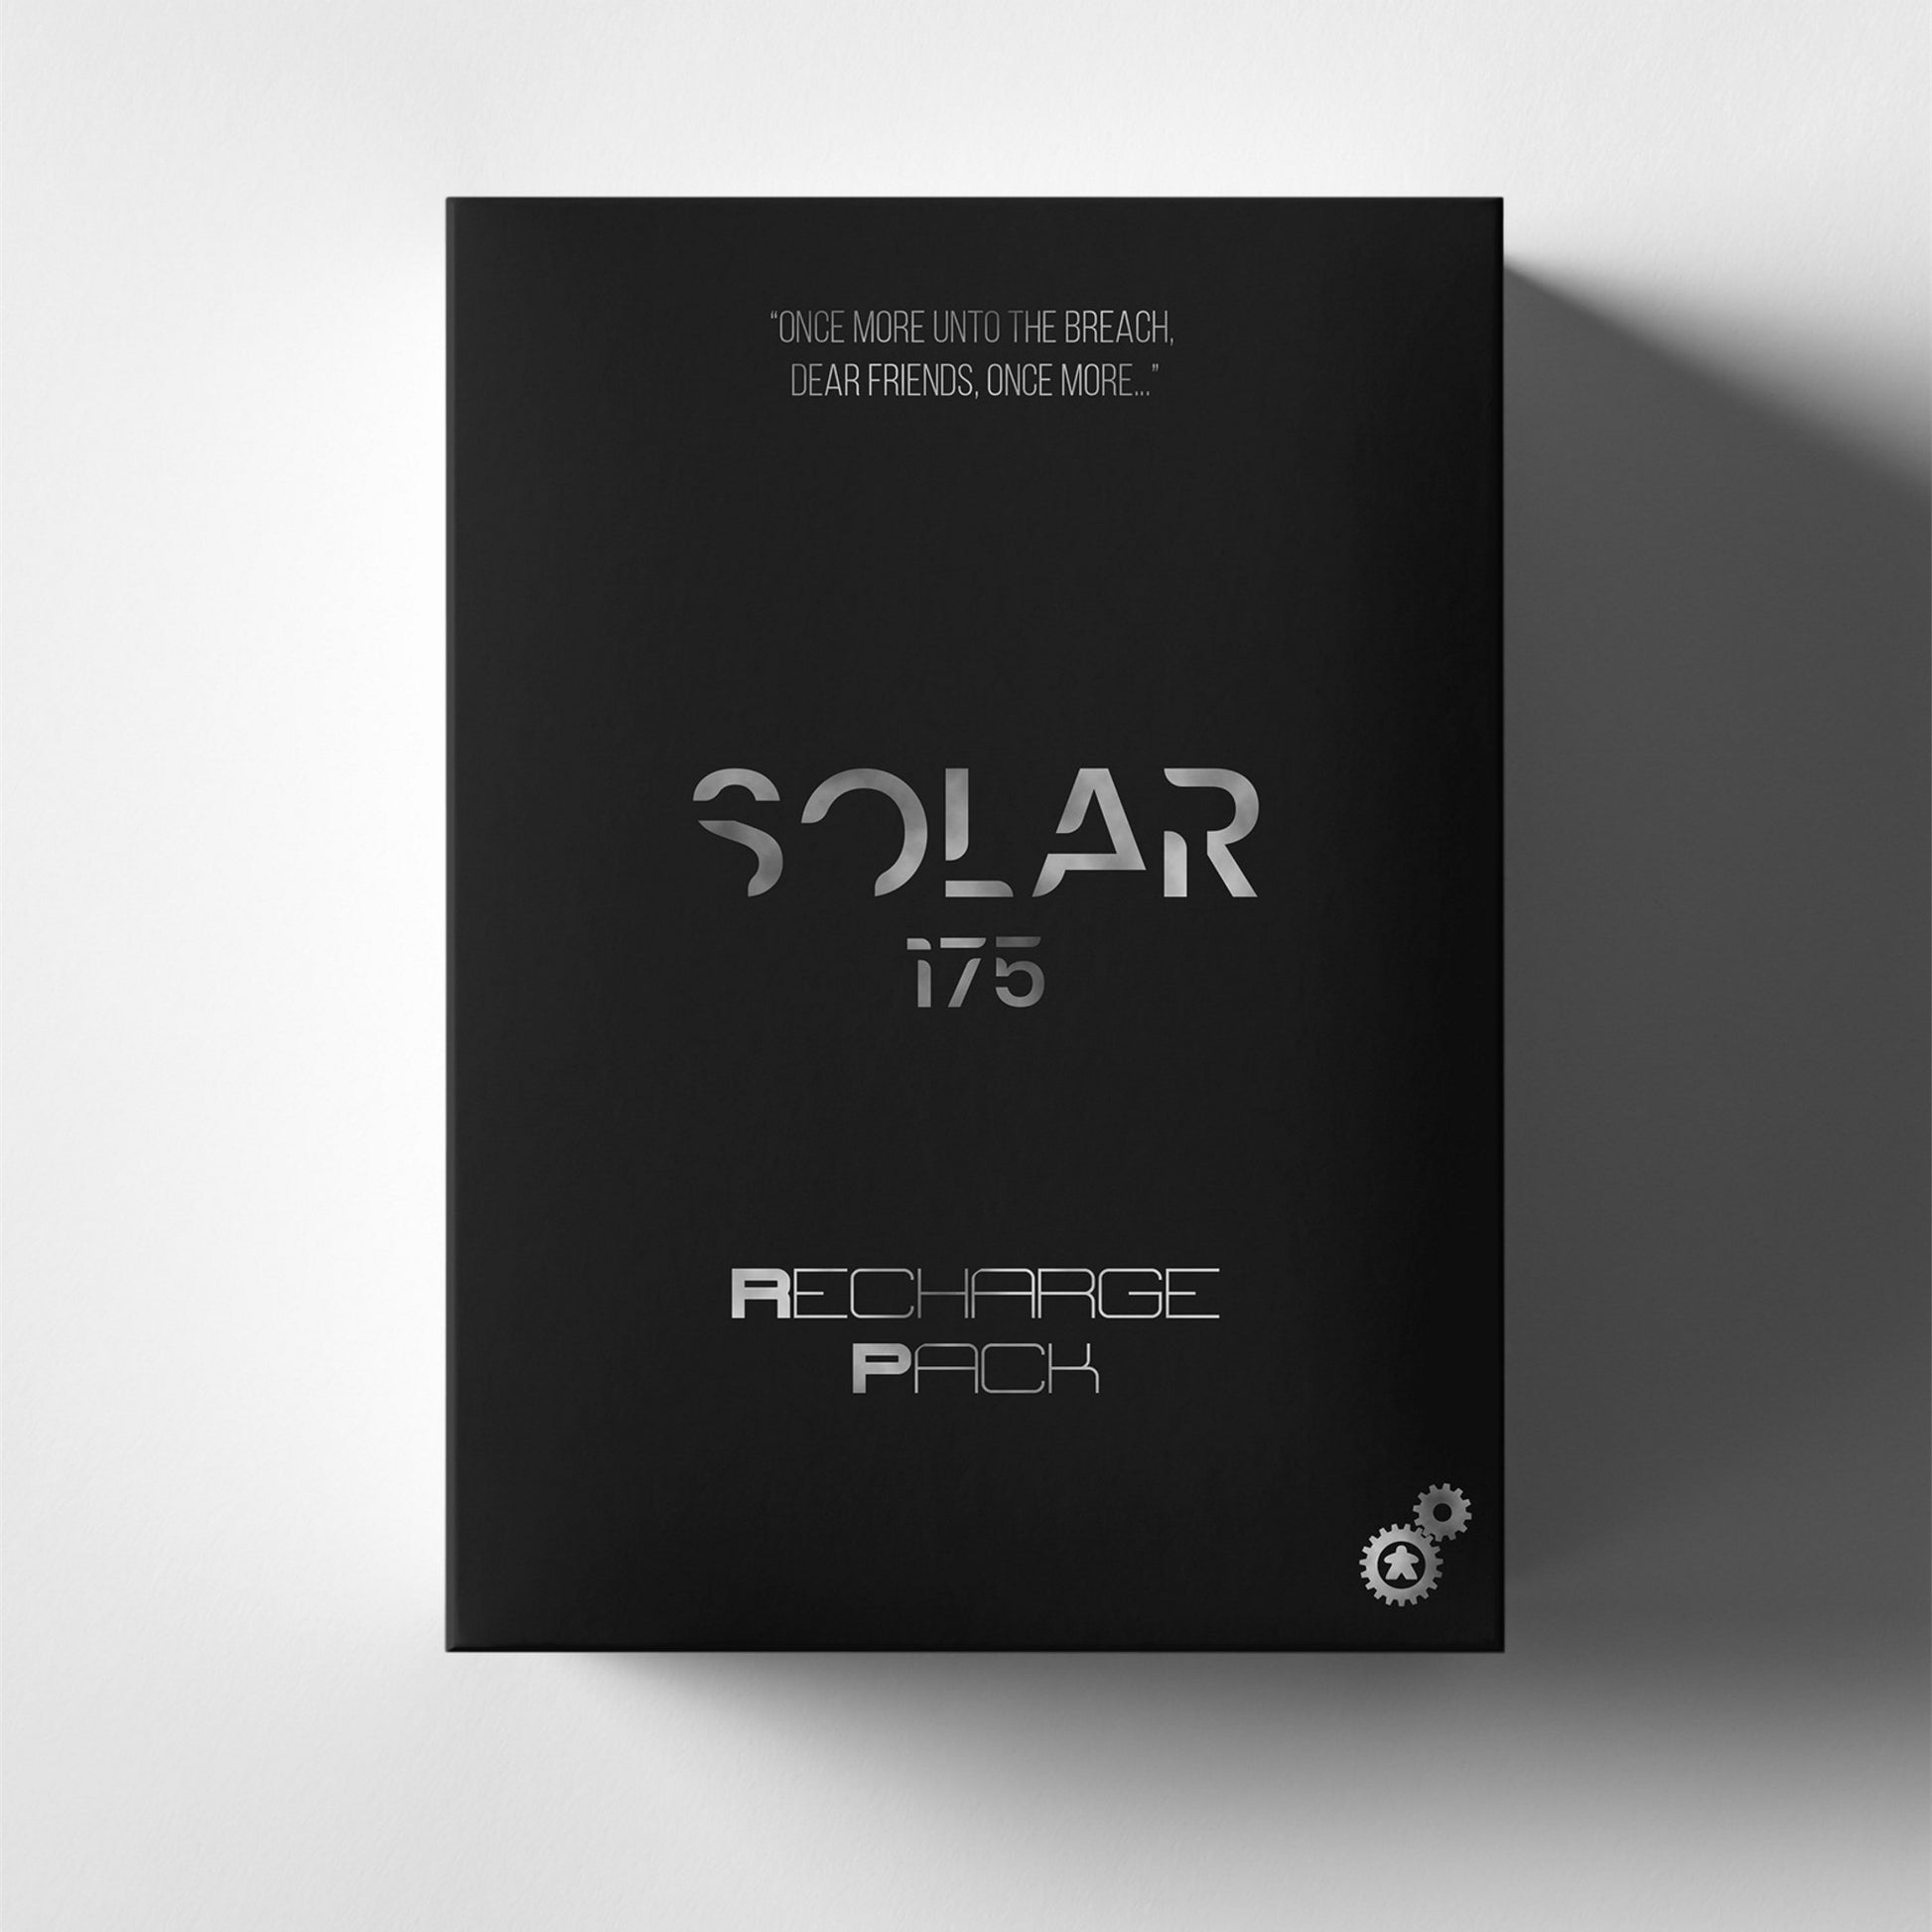 Solar 175 - Recharge Pack